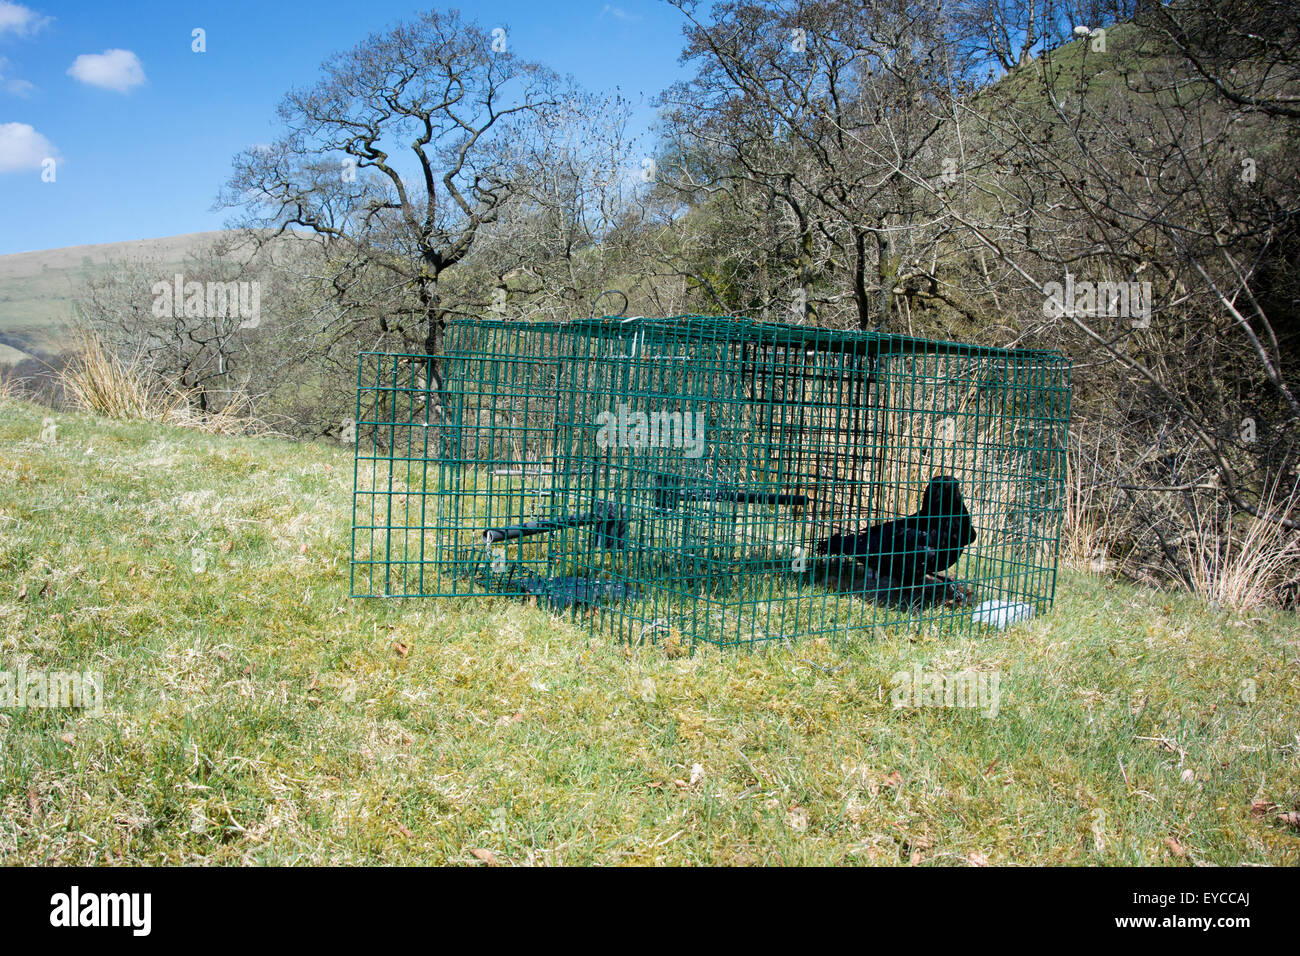 Carrion Crow in Larsen trap, used to control crow population in countryside. Cumbria, UK. Stock Photo